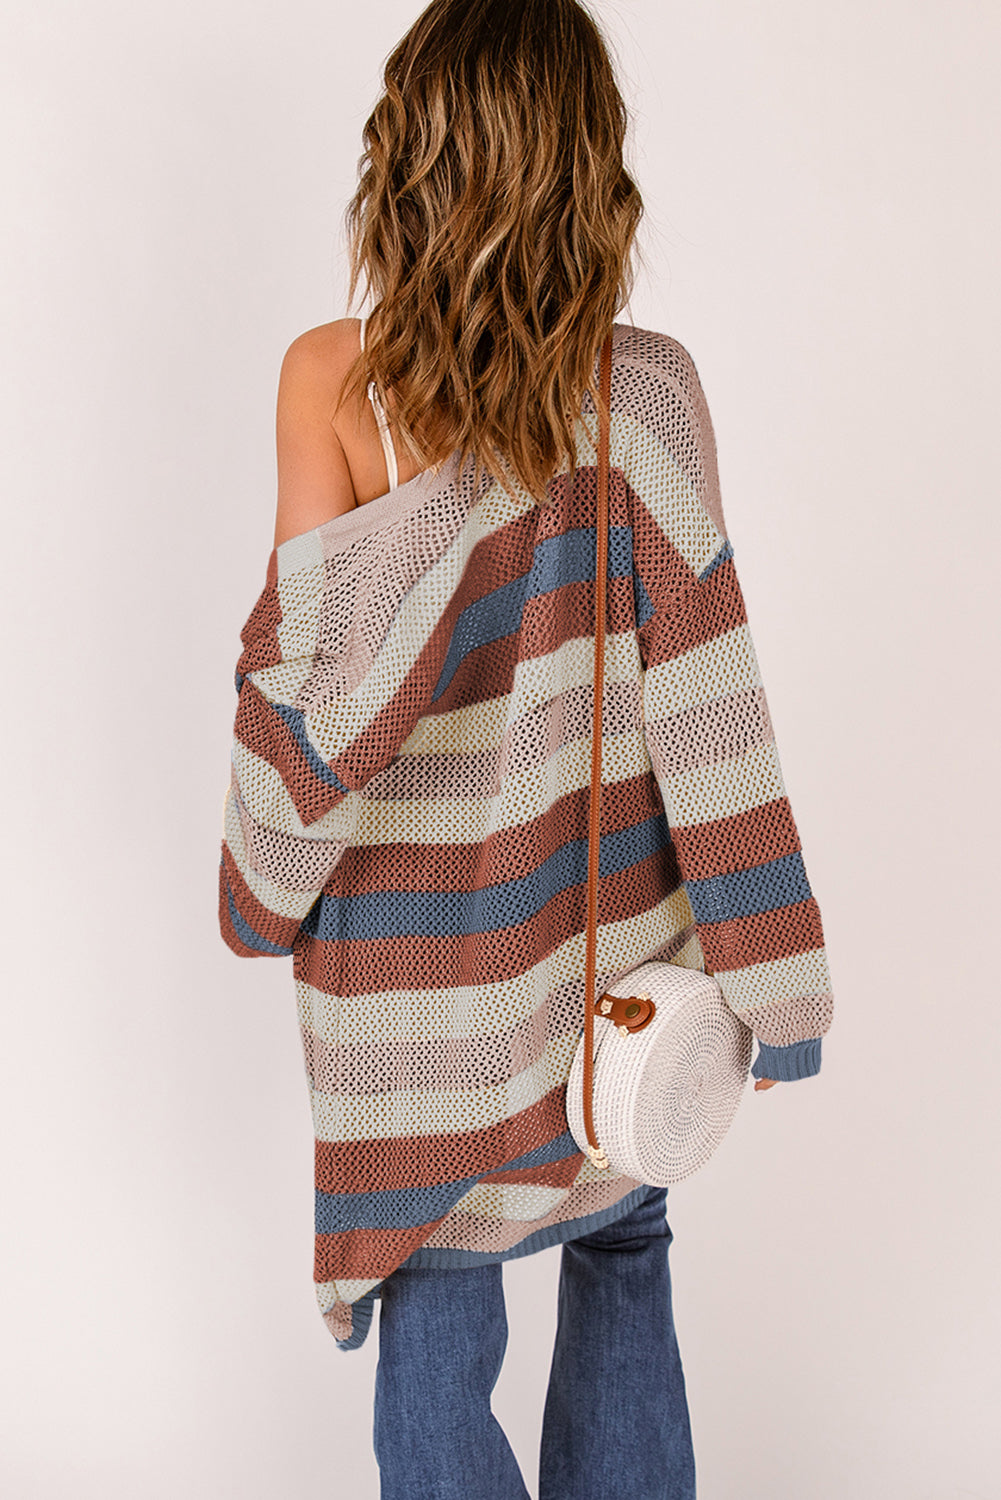 Striped Color Block Hollowed Knit Cardigan